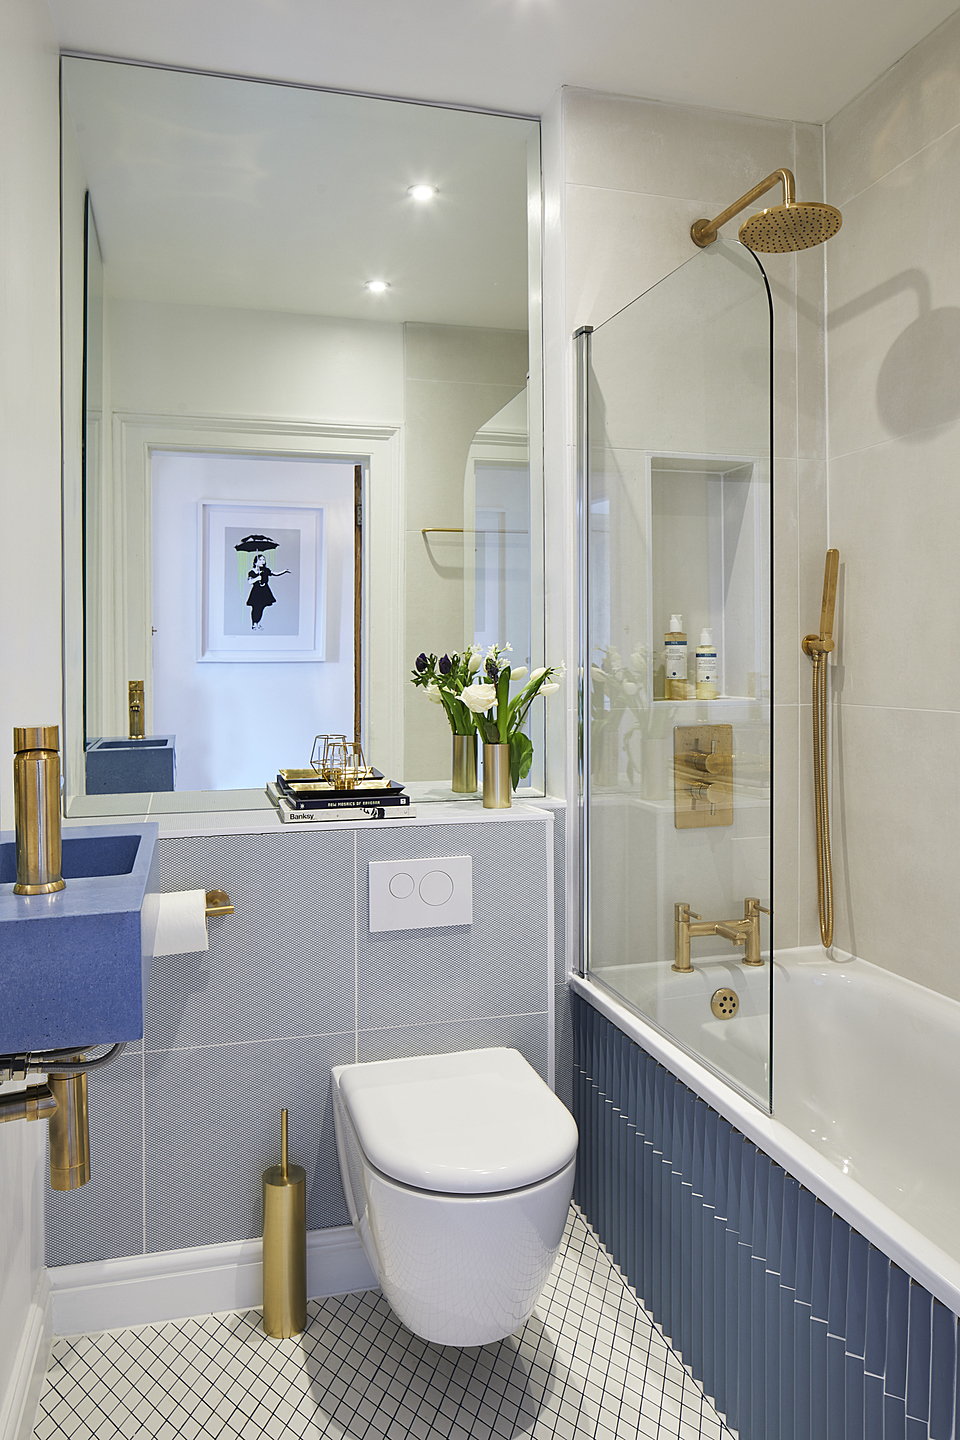 Designing a Small Bathroom – Ideas and Tips